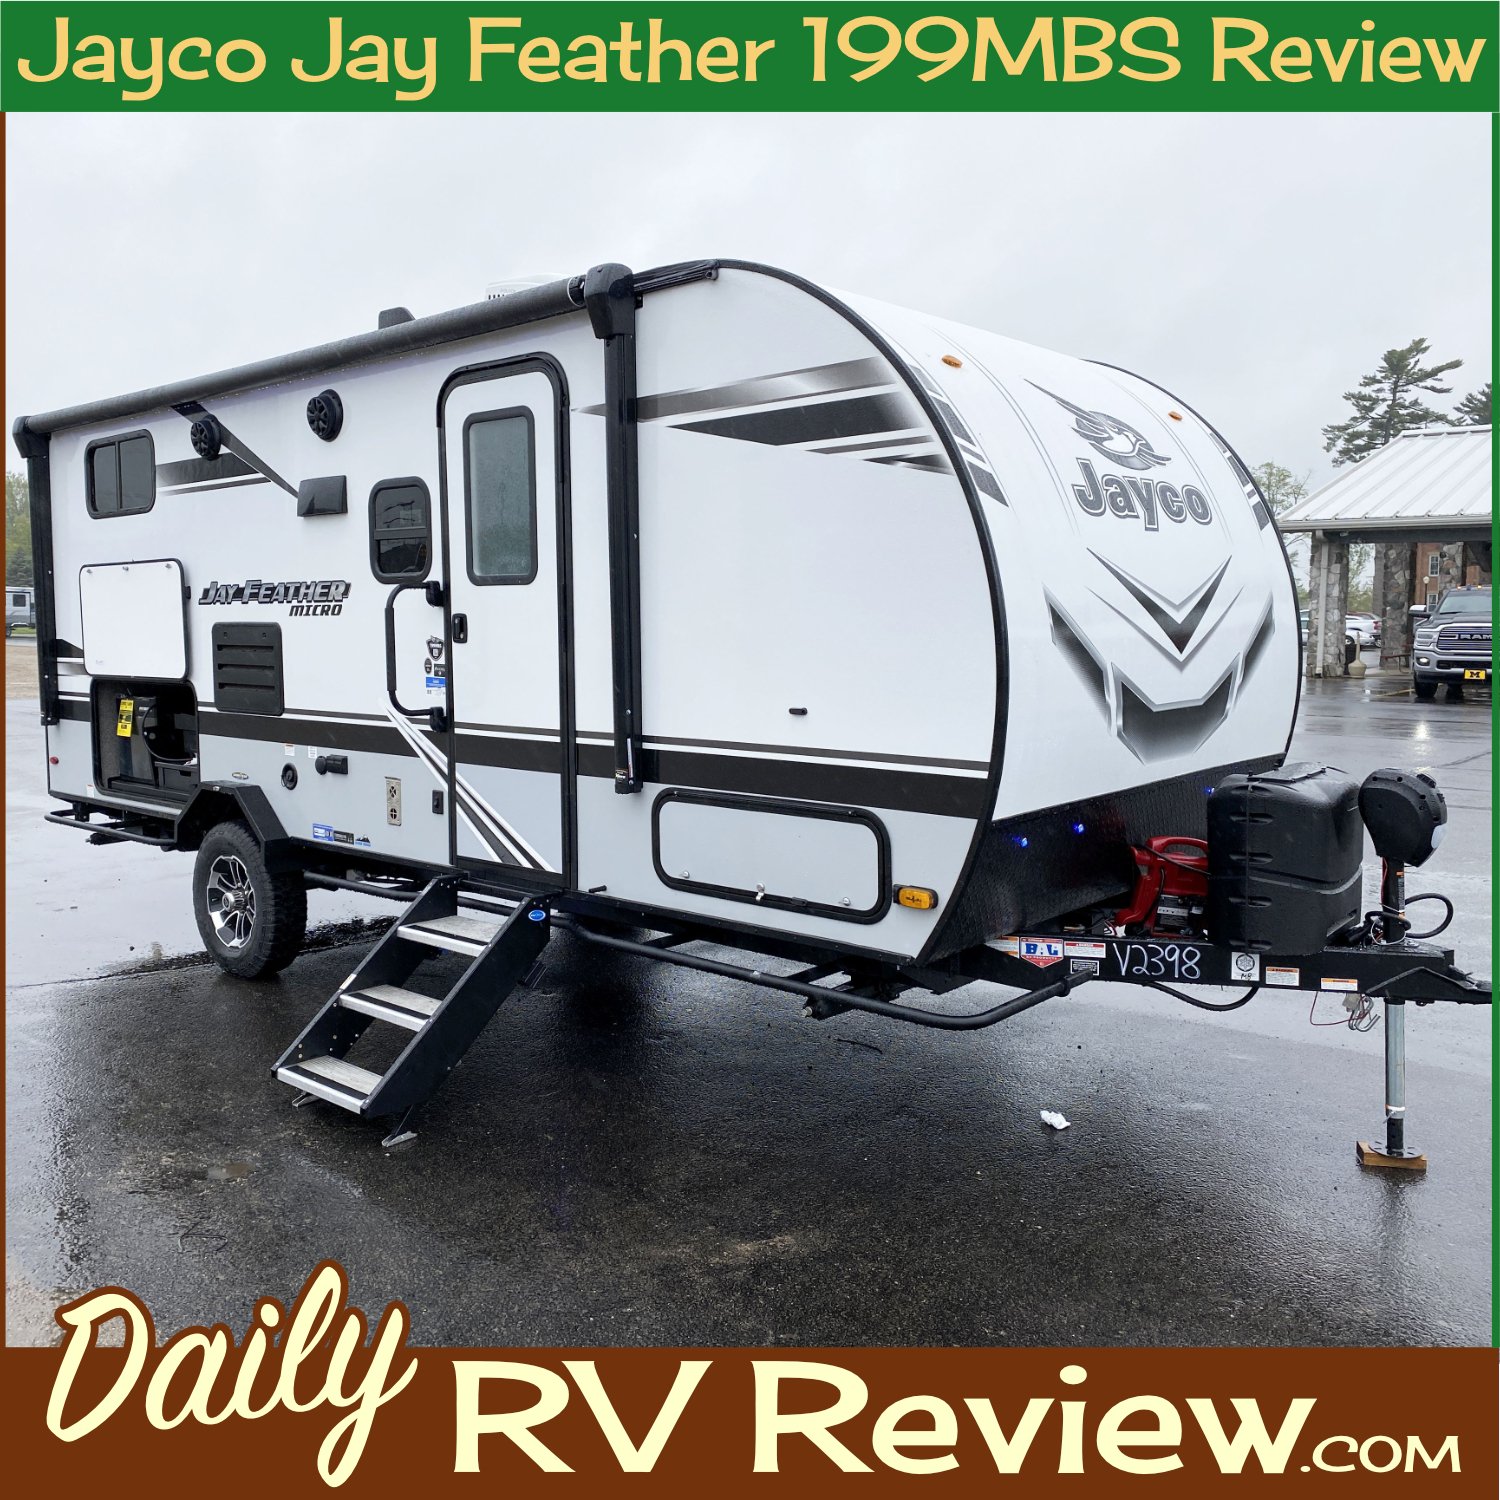 RV review: Jayco Jay Feather 199MBS - high content, small package